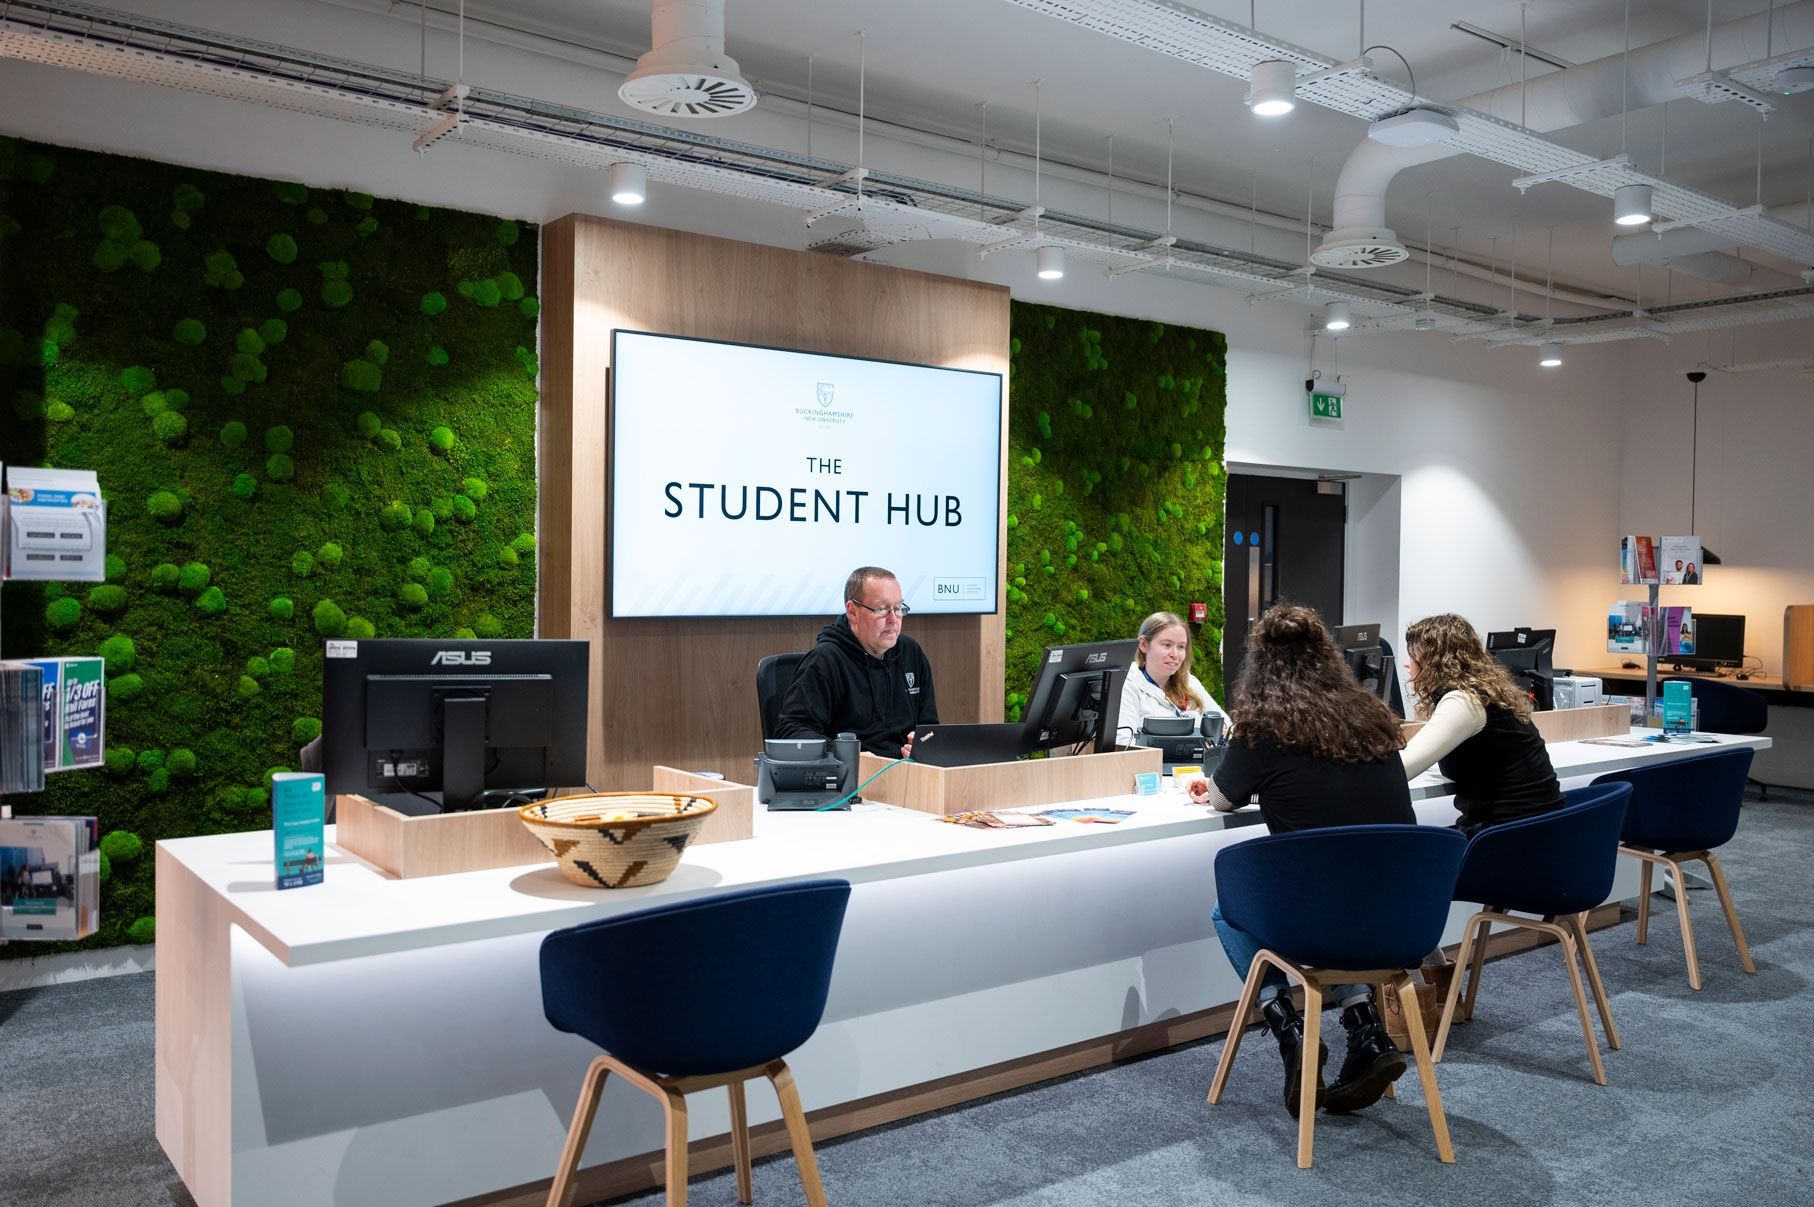 Students and staff in Student Hub